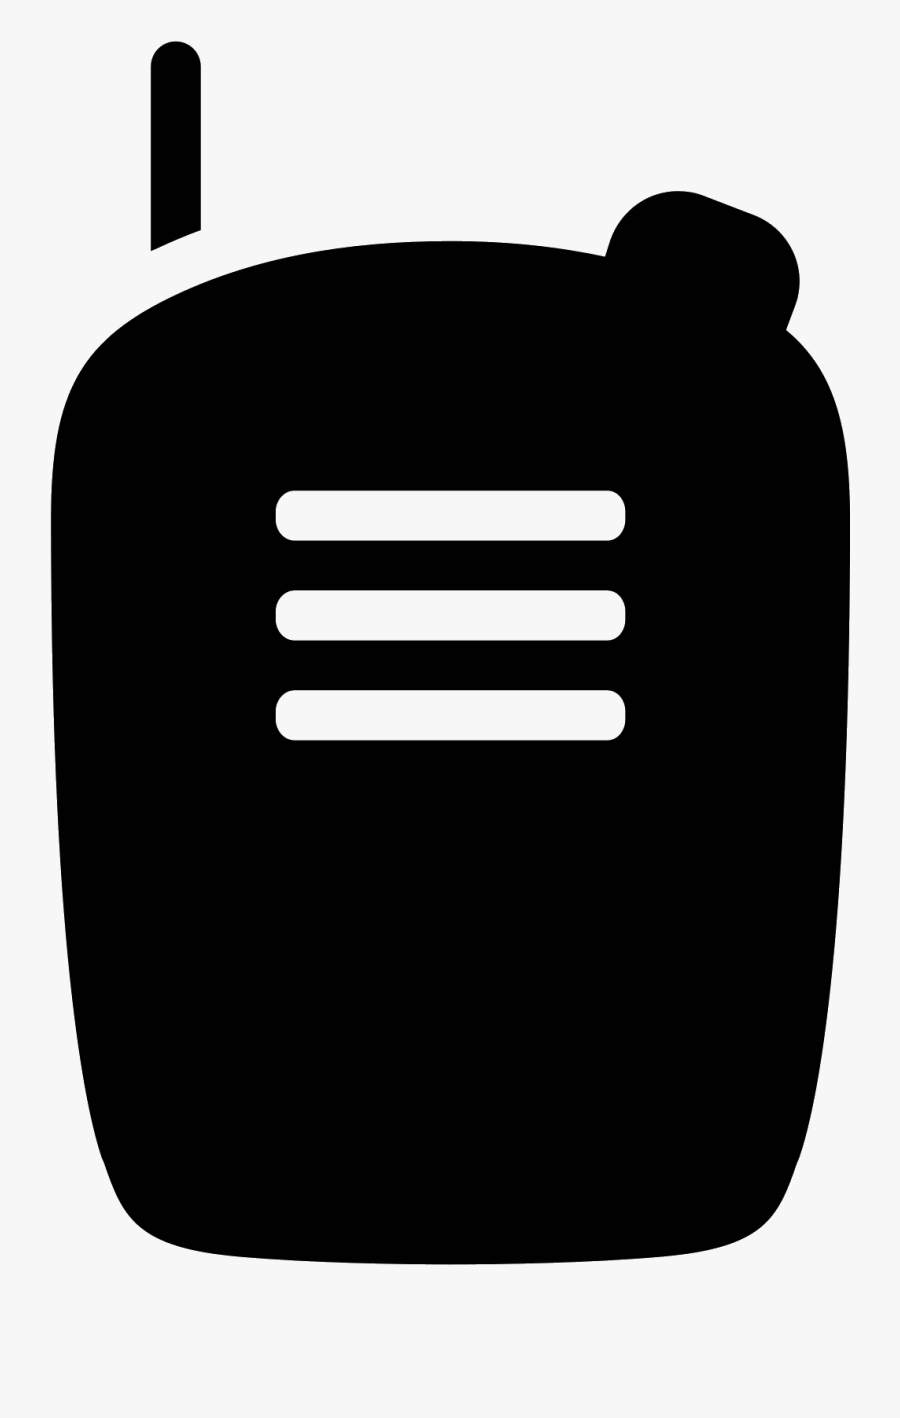 Walkie Talkie Filled Icon, Transparent Clipart